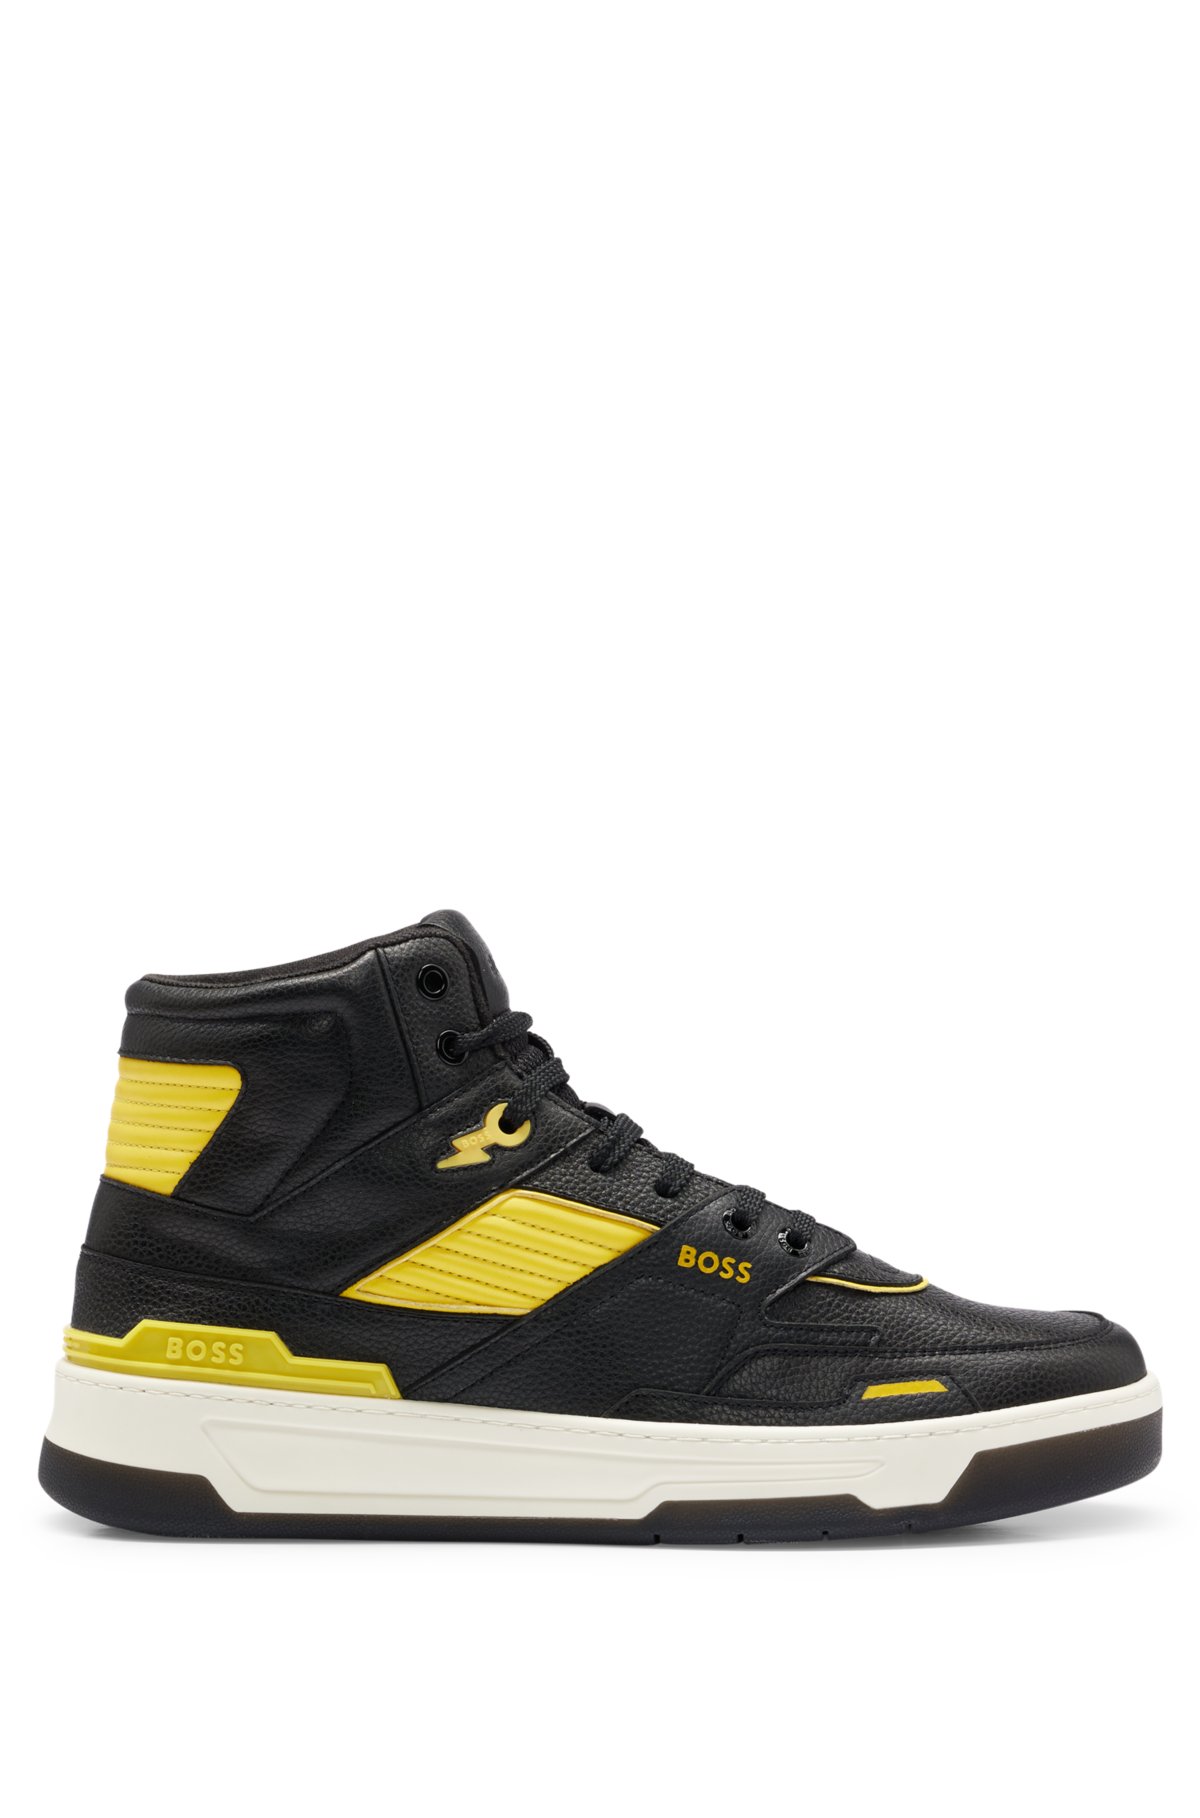 Hugo Men's Basketball-inspired High-Top Trainer Sneakers with Branded Details - Black - Size 6